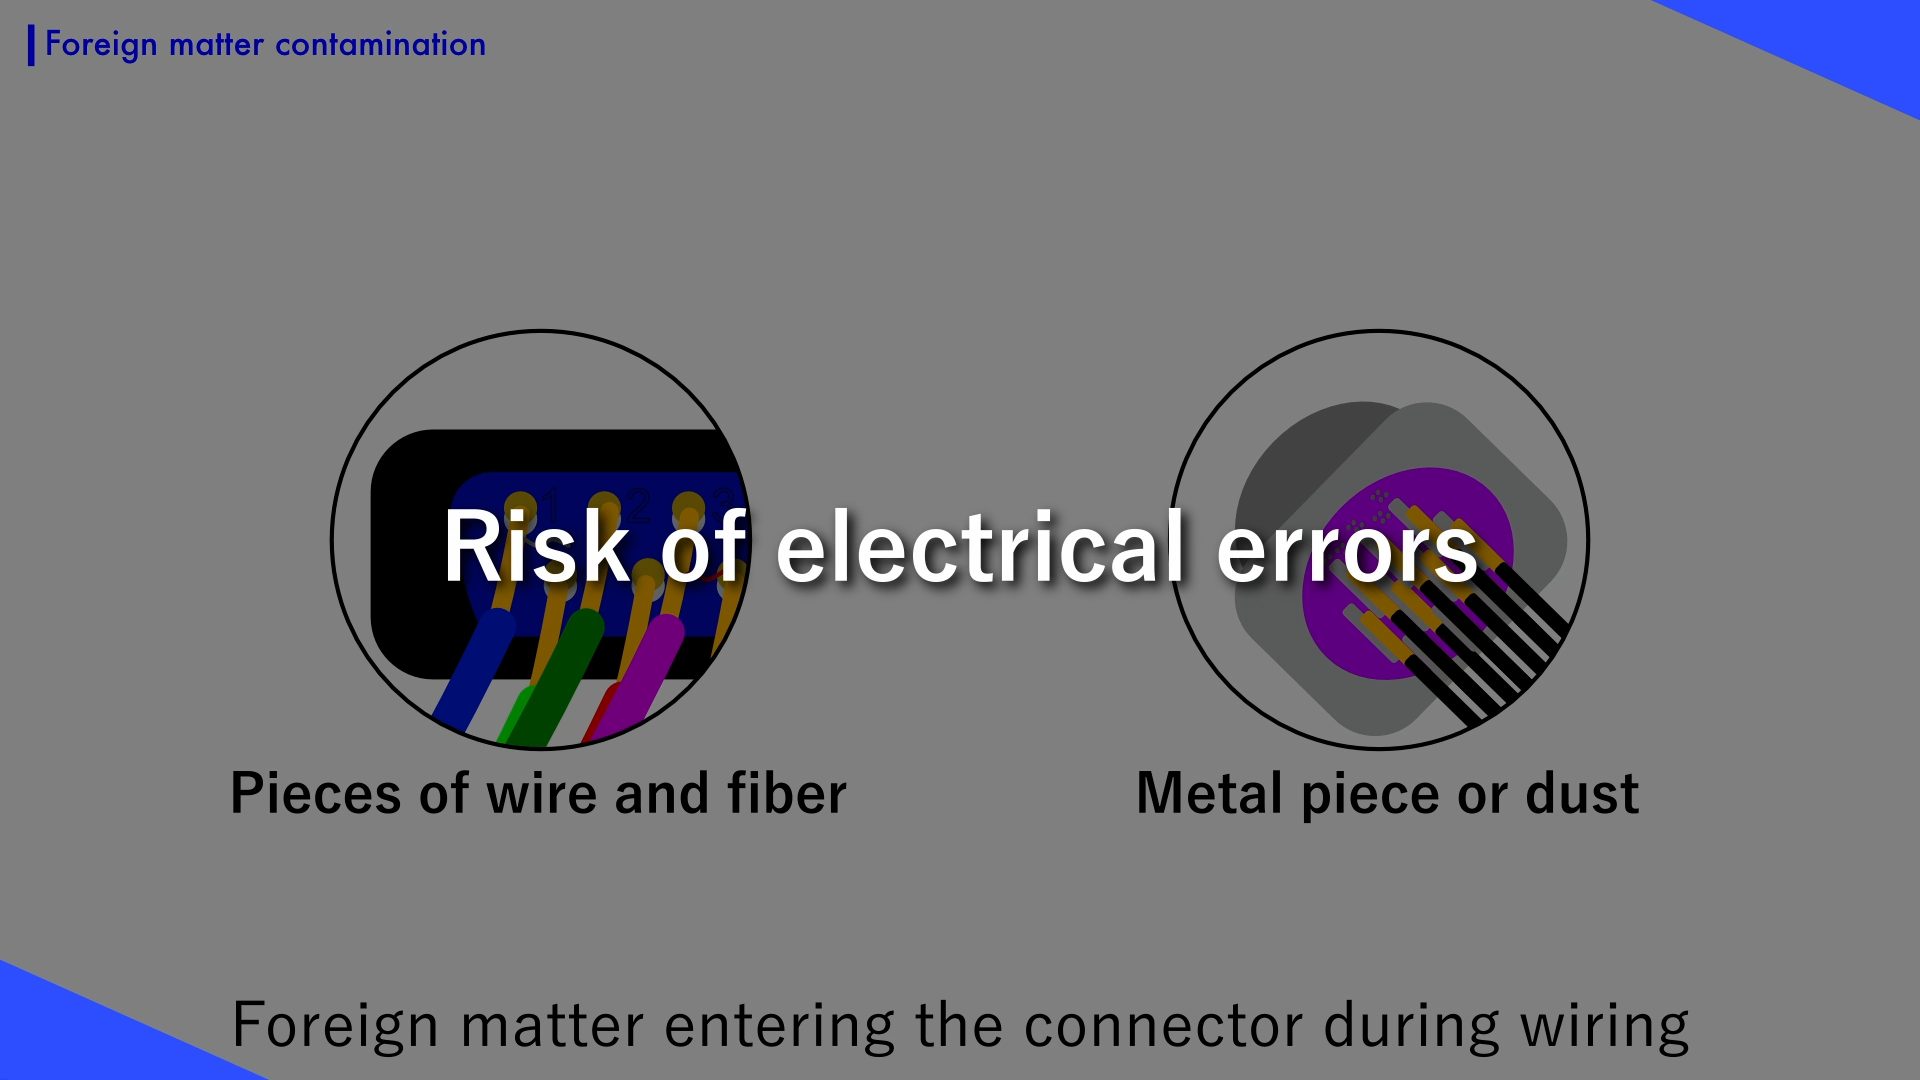 Foreign matter in the connector causing electrical errors for the cable